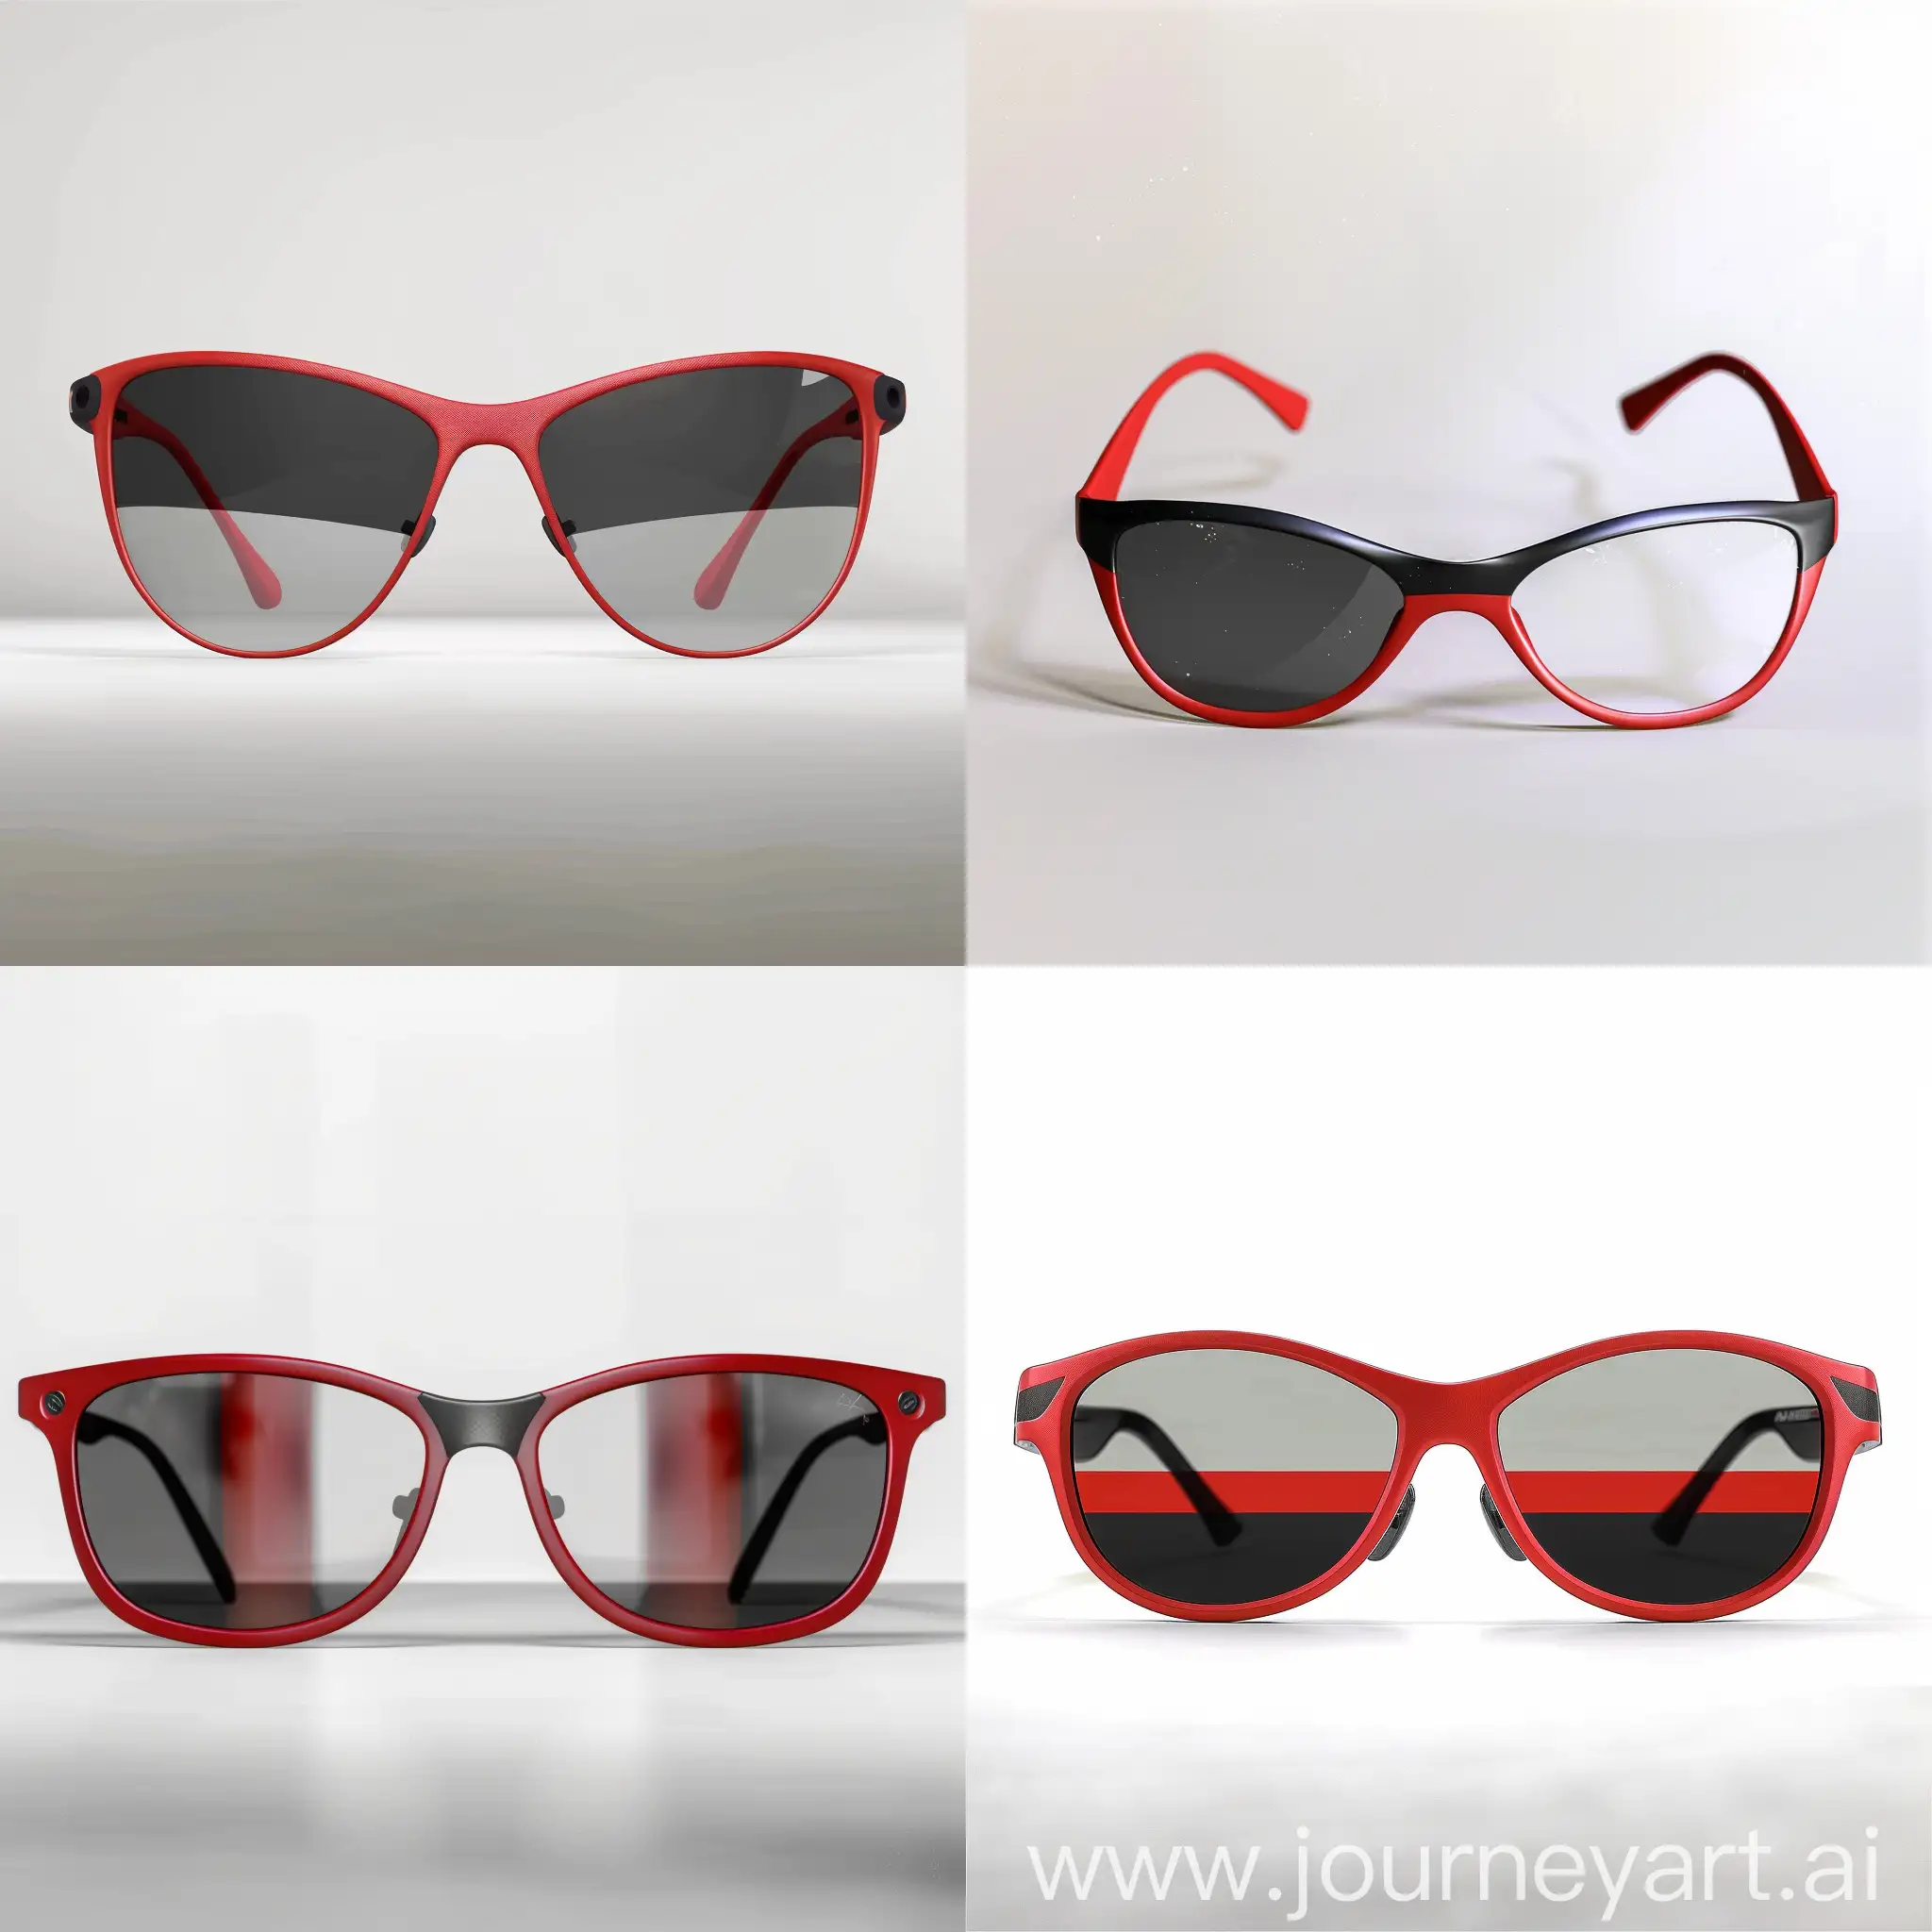 Sporty-Red-and-Black-Polarized-3D-Glasses-on-White-Background